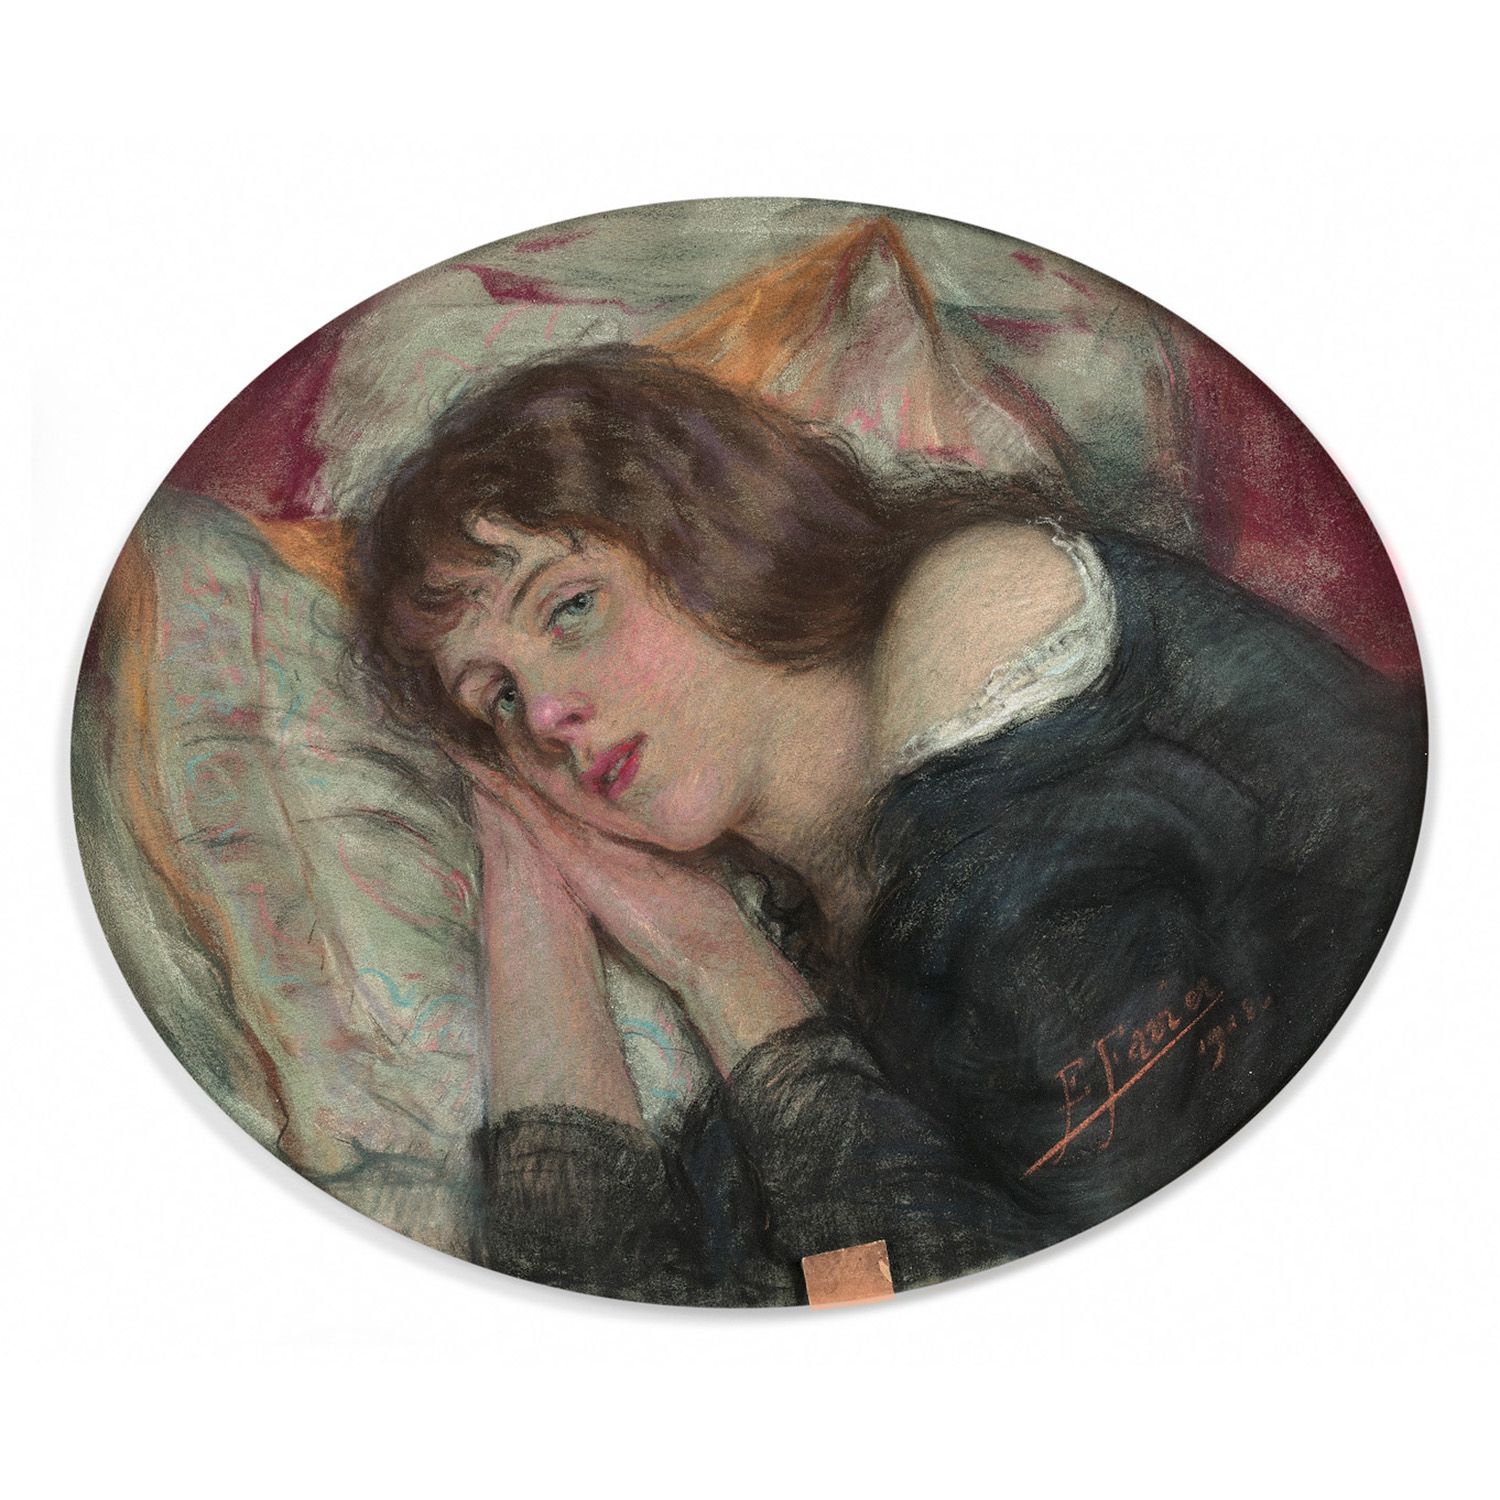 Null EUGÈNE FAVIER (PARIS 1860 - ? 1942)

YOUNG GIRL AT REST

Oval pastel

Signe&hellip;